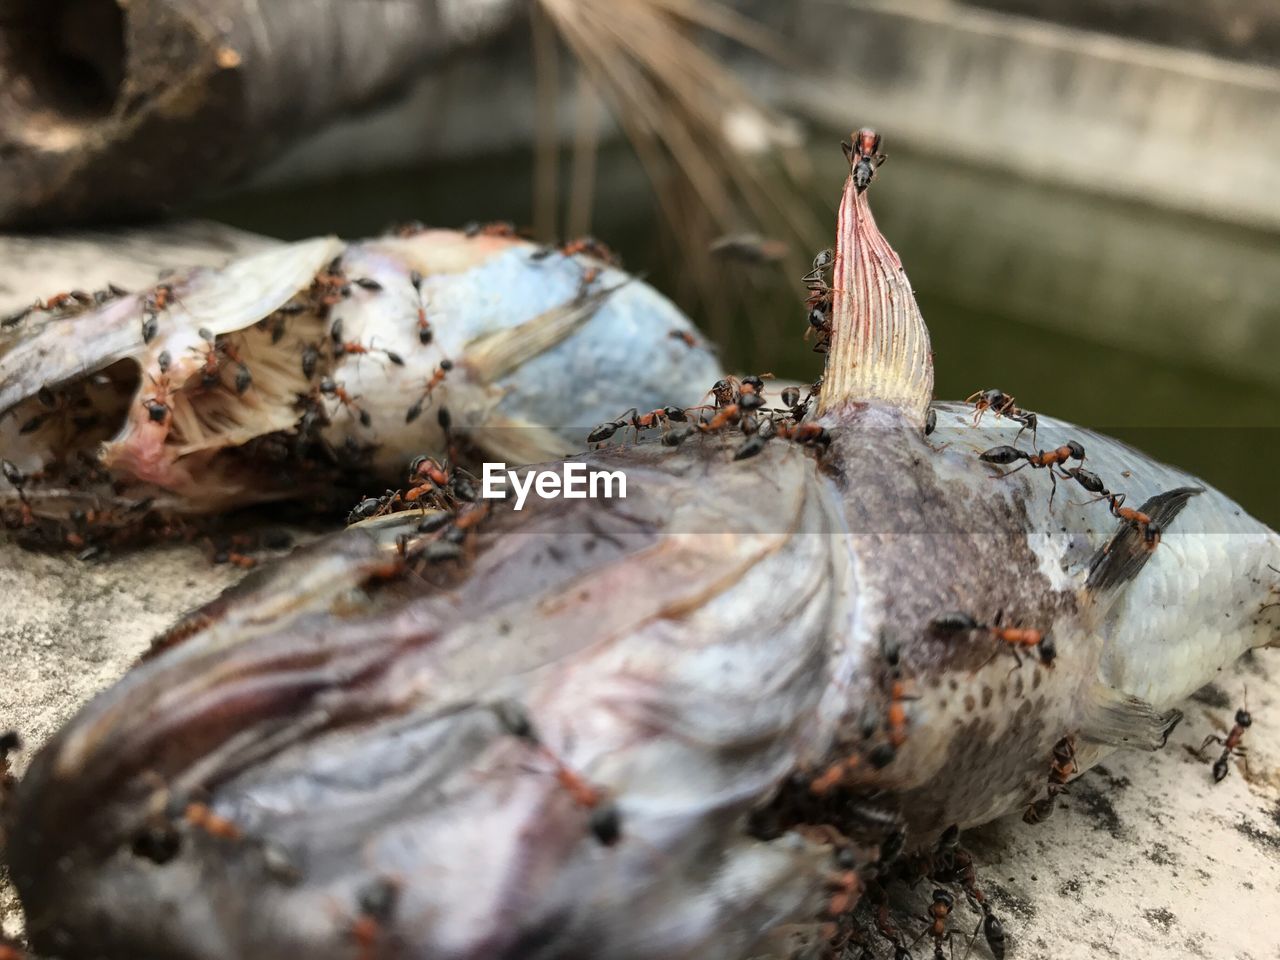 Close-up of insects on dead fish